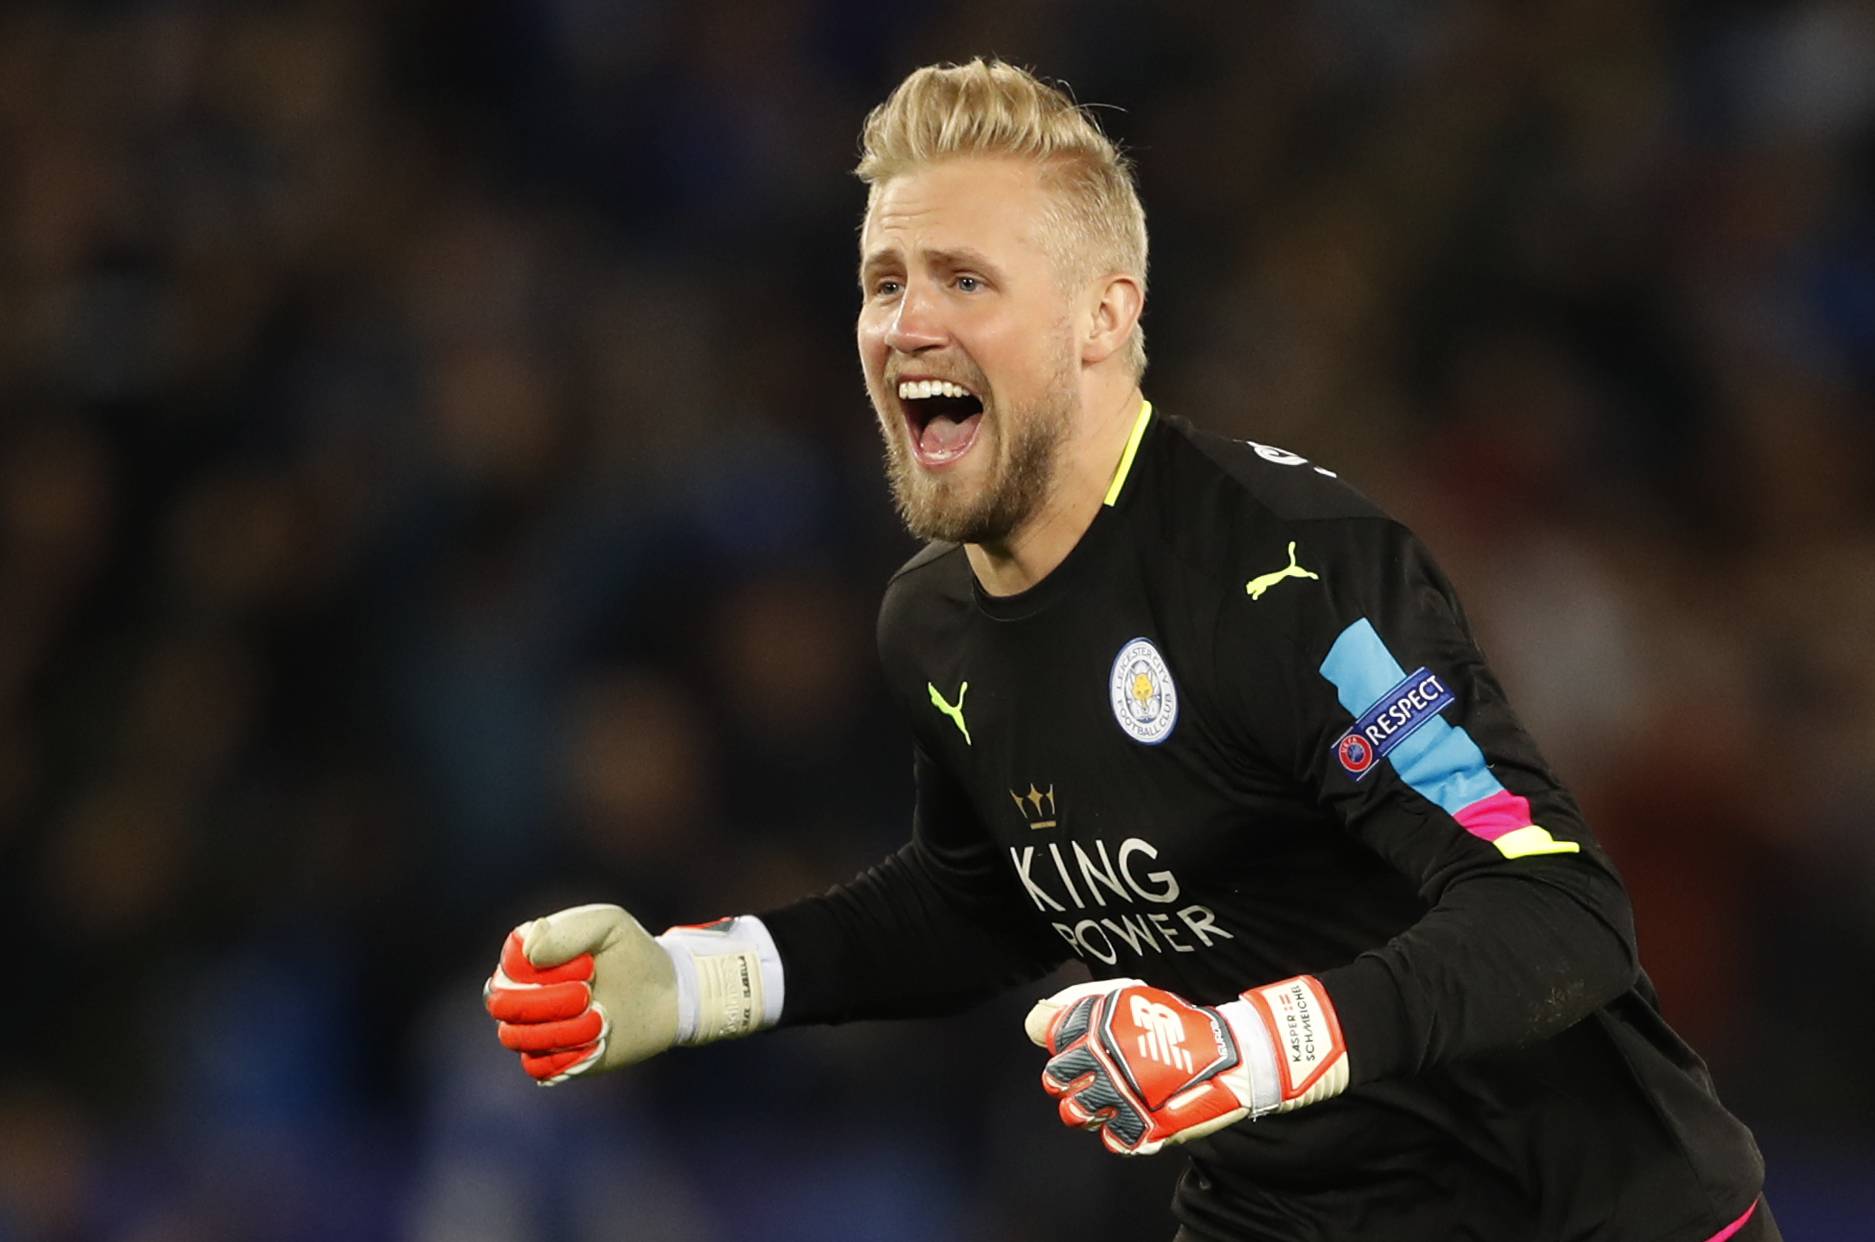 Leicester City's Kasper Schmeichel celebrates after Wes Morgan scores their first goal